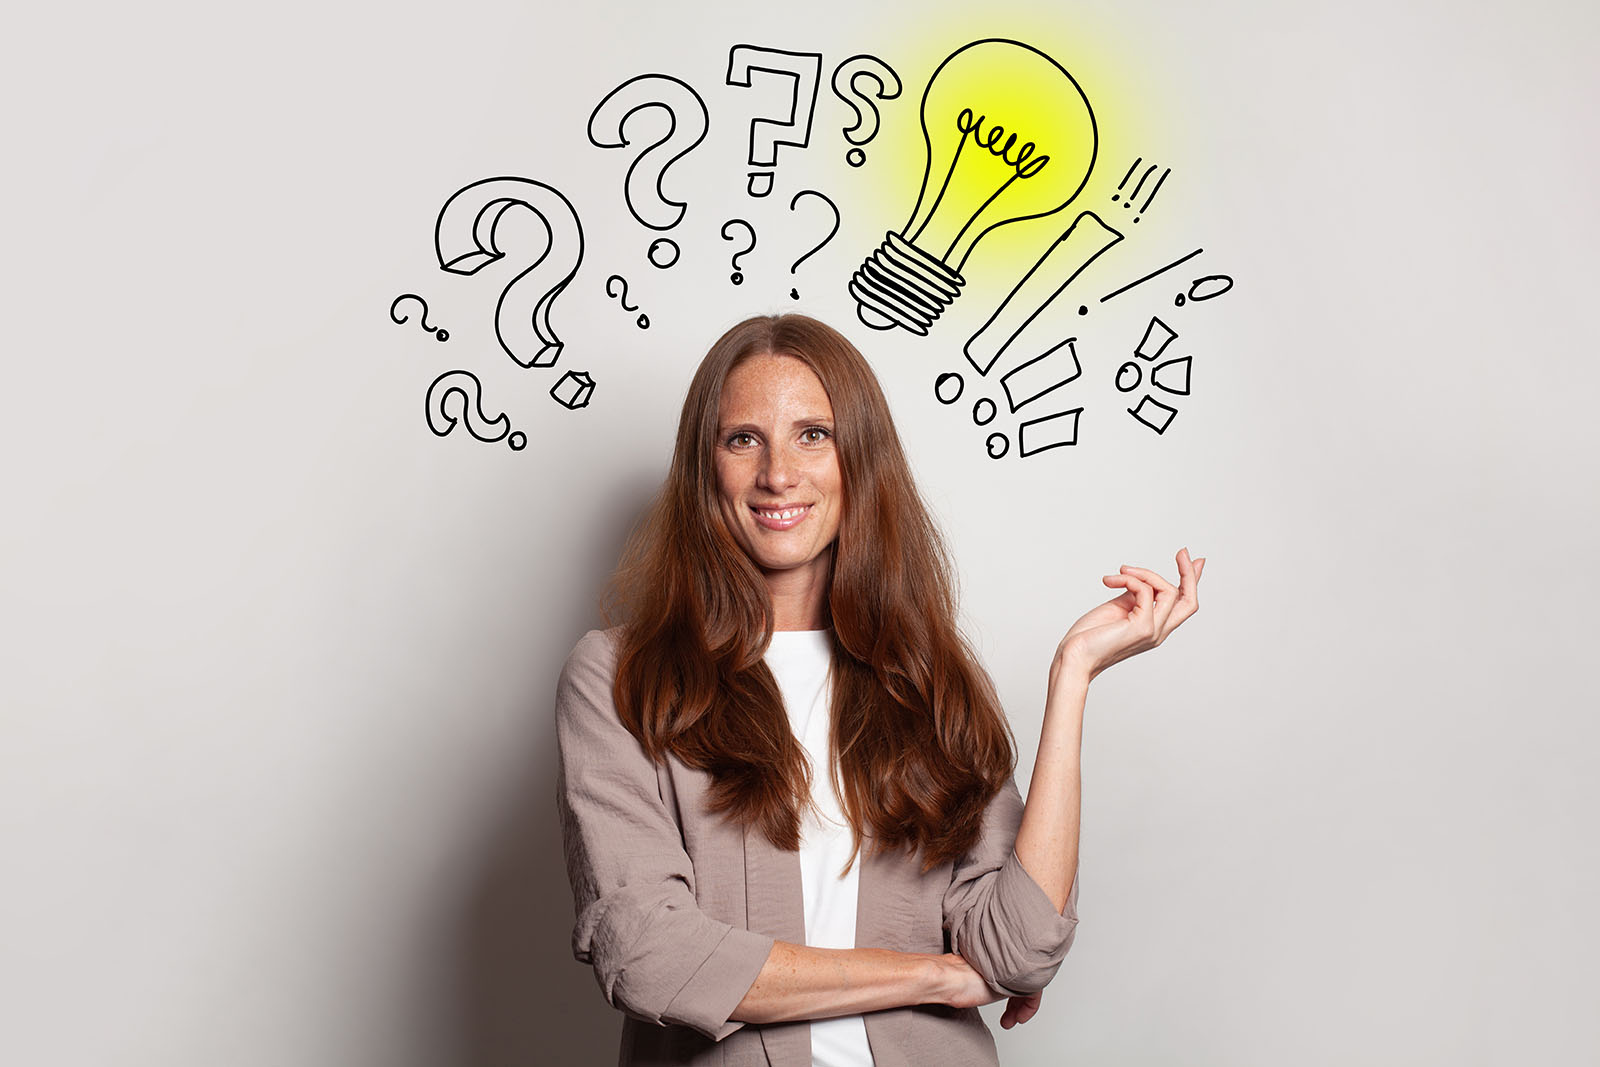 smiling woman with head surrounded by question marks, exclamation points and yellow light bulb